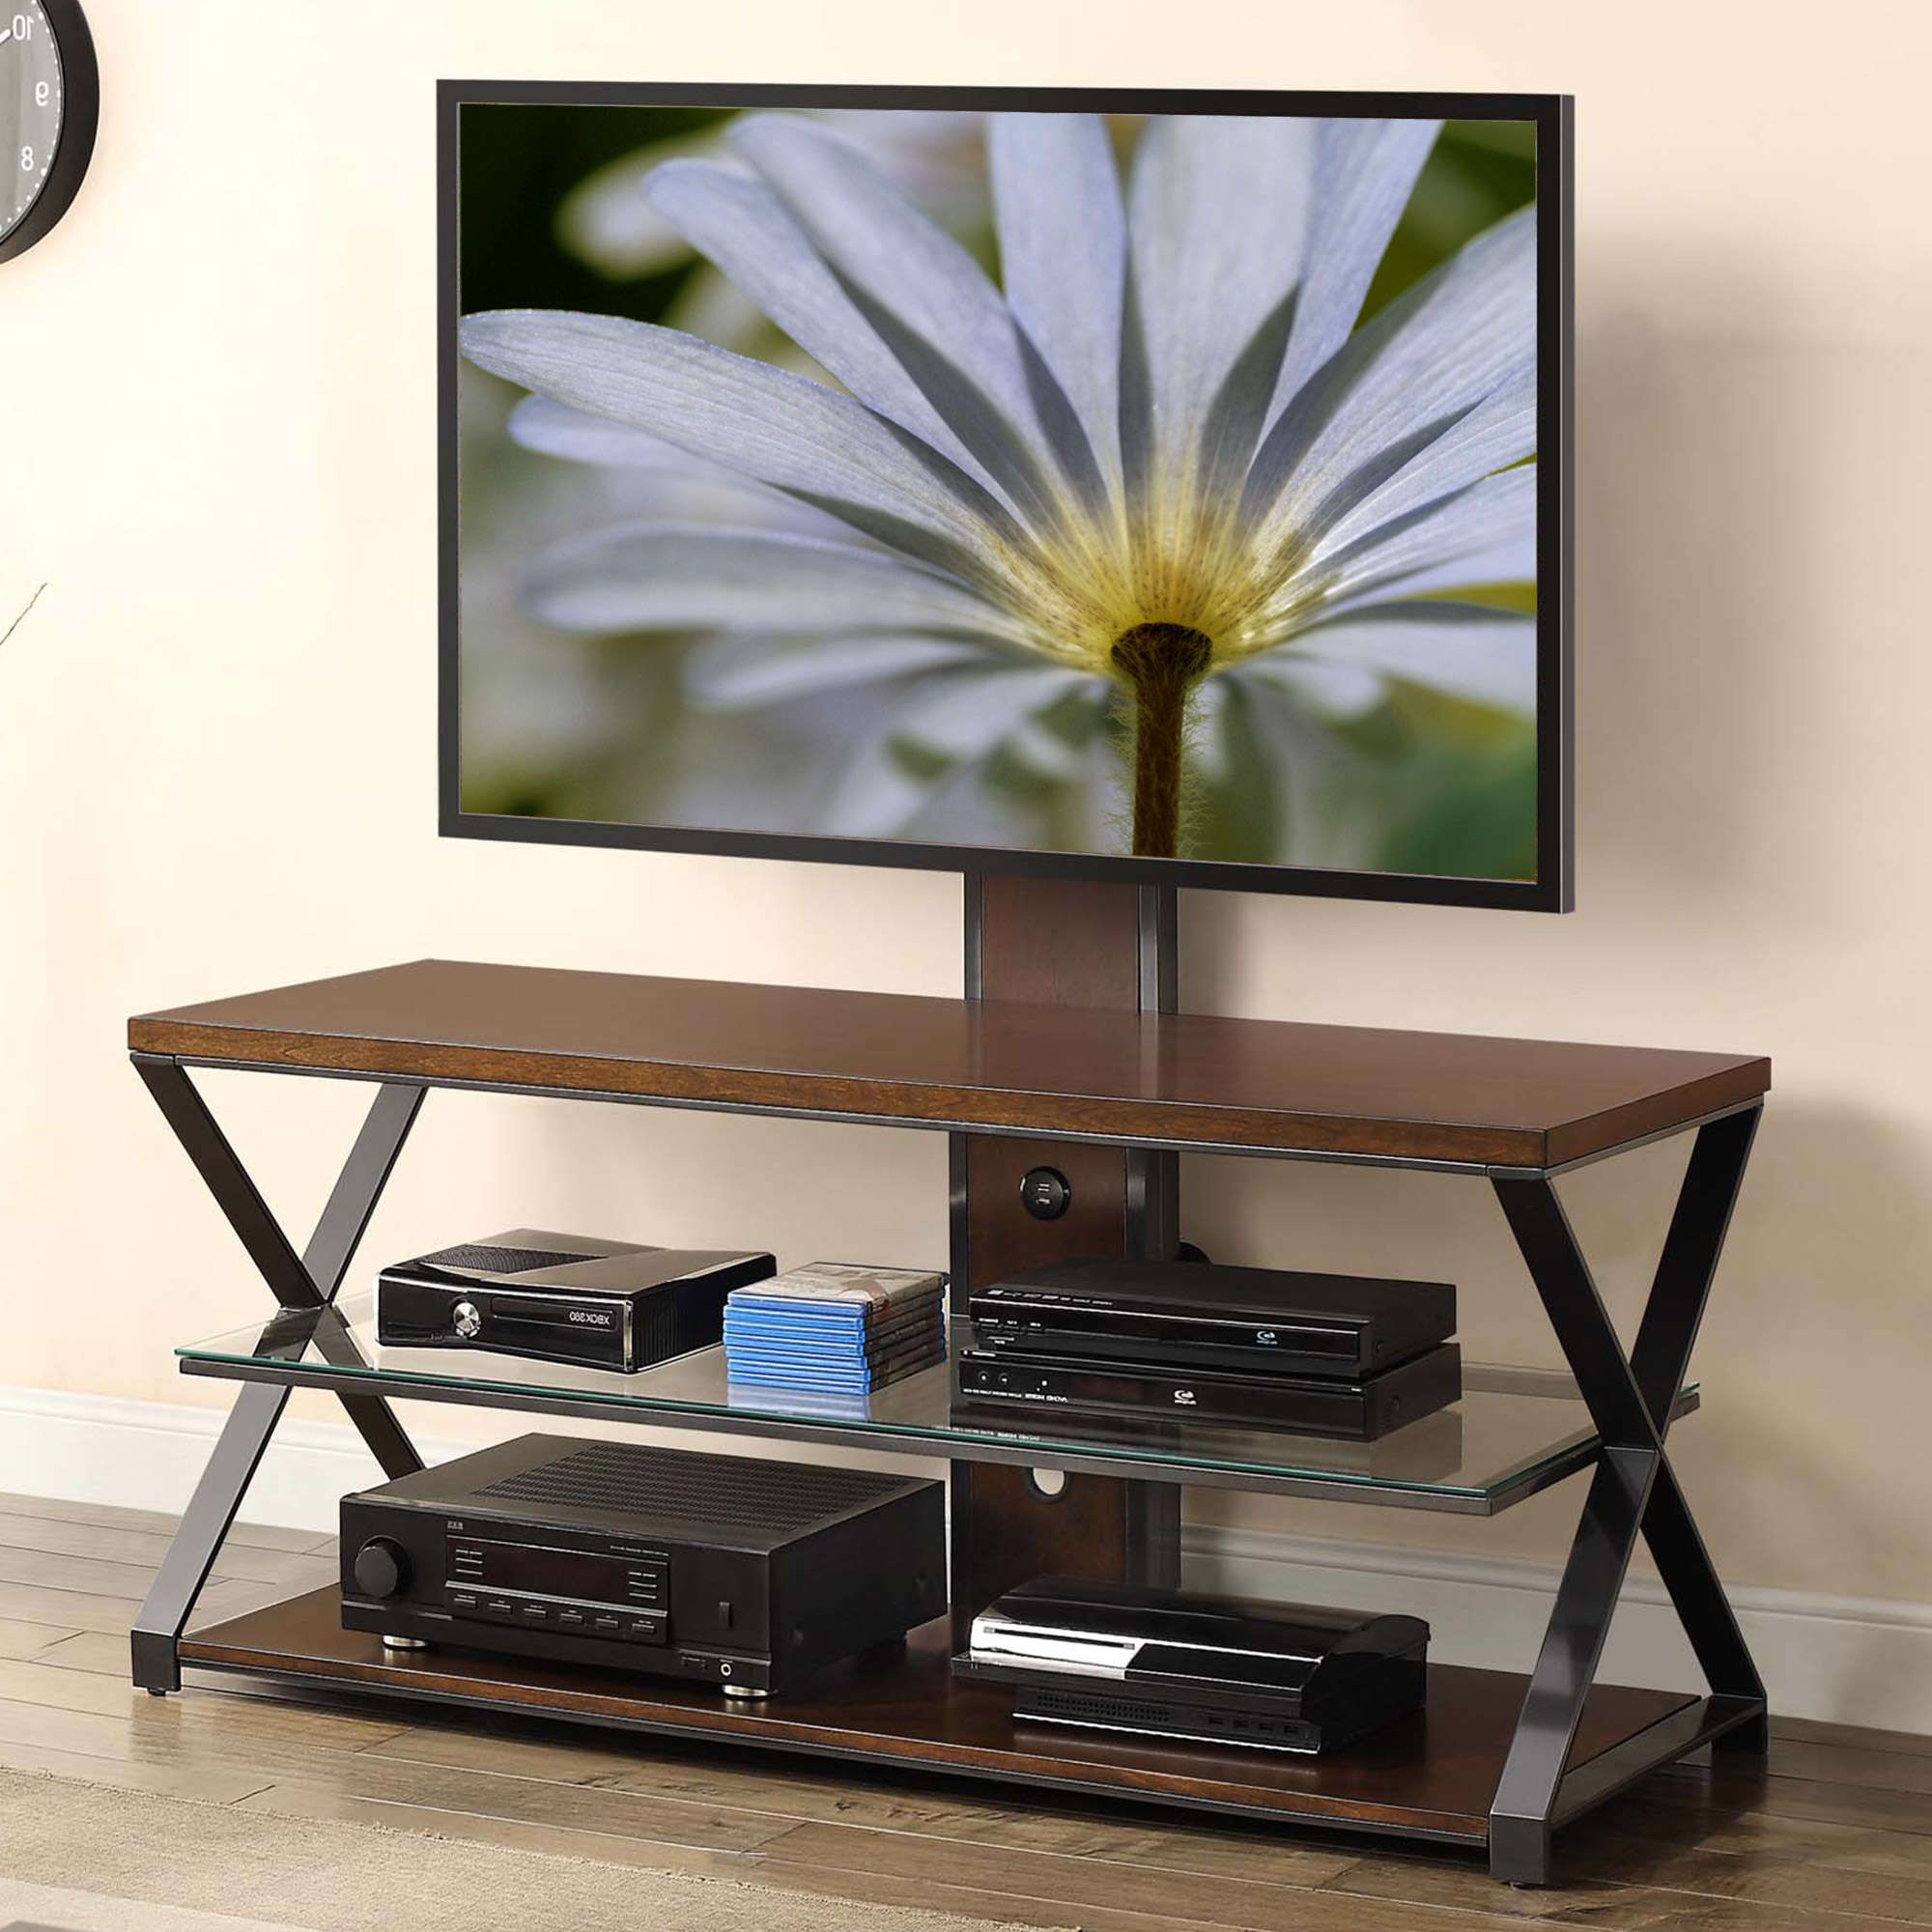 2018 Jaxon 3 In 1 Cognac Tv Stand For Tvs Up To 70" – Walmart Throughout Jaxon 71 Inch Tv Stands (Photo 2 of 20)